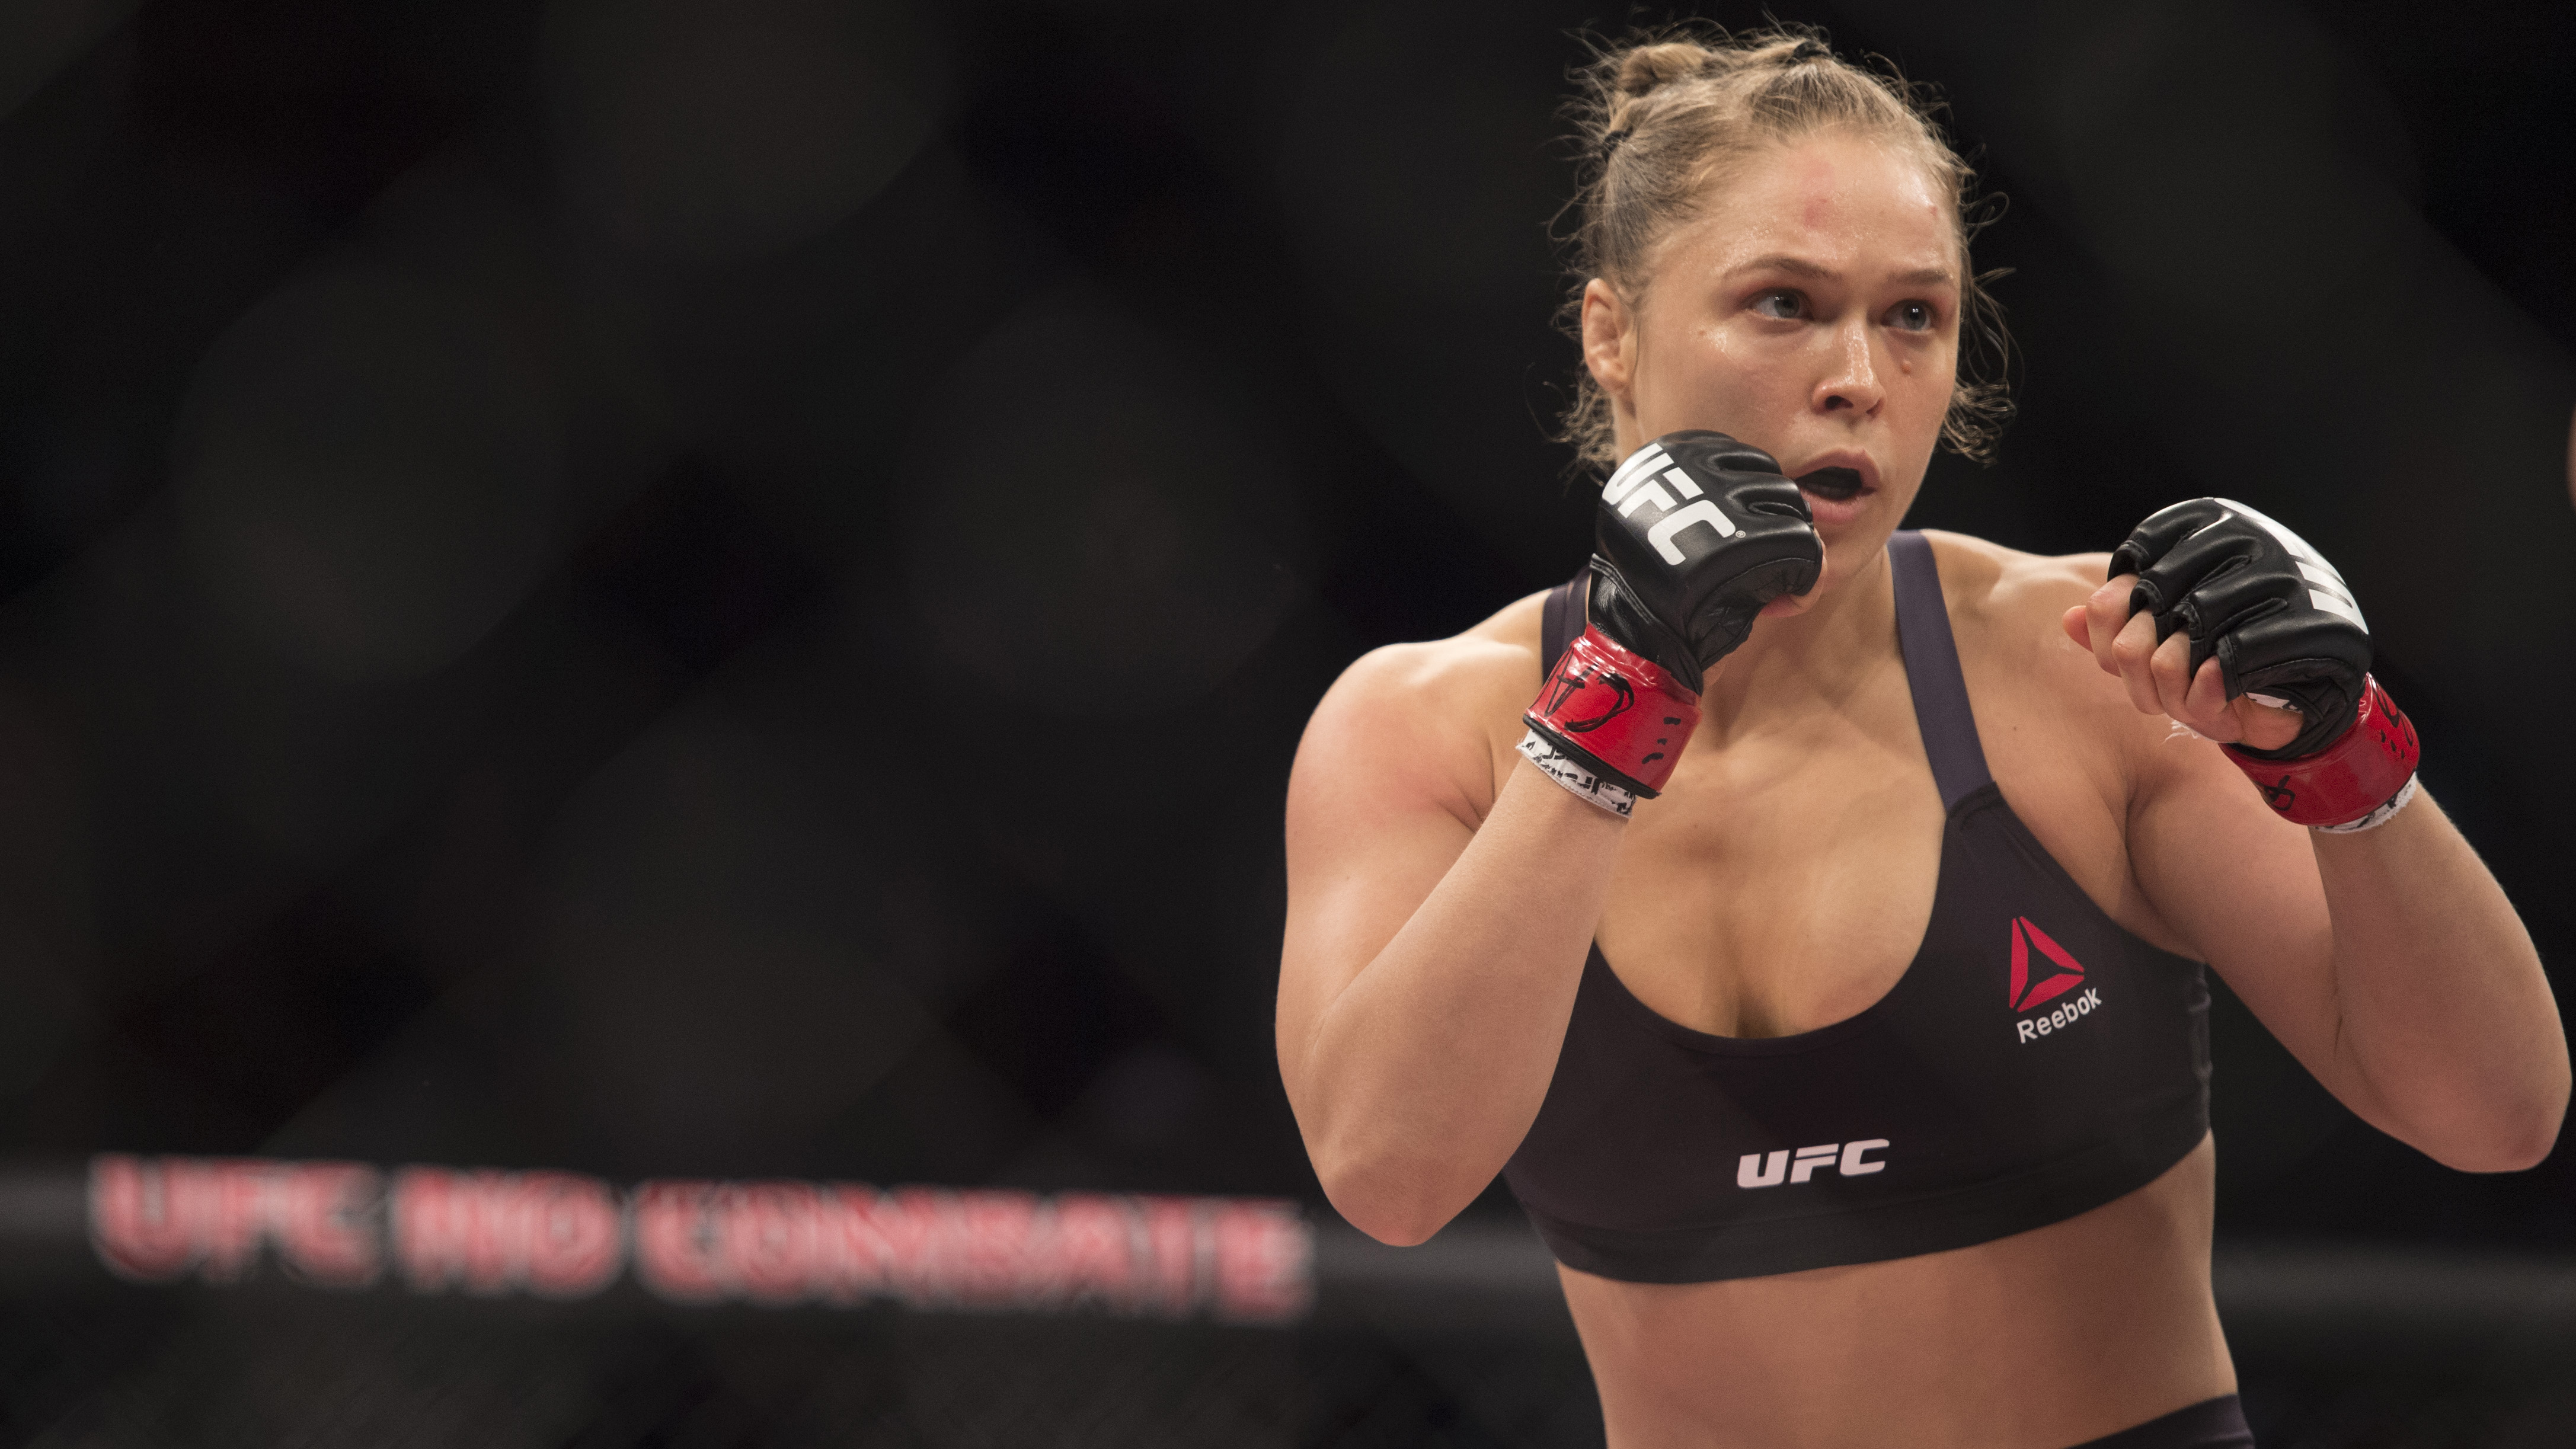 Ronda Rousey announces next fight will be against Holly Holm Sports